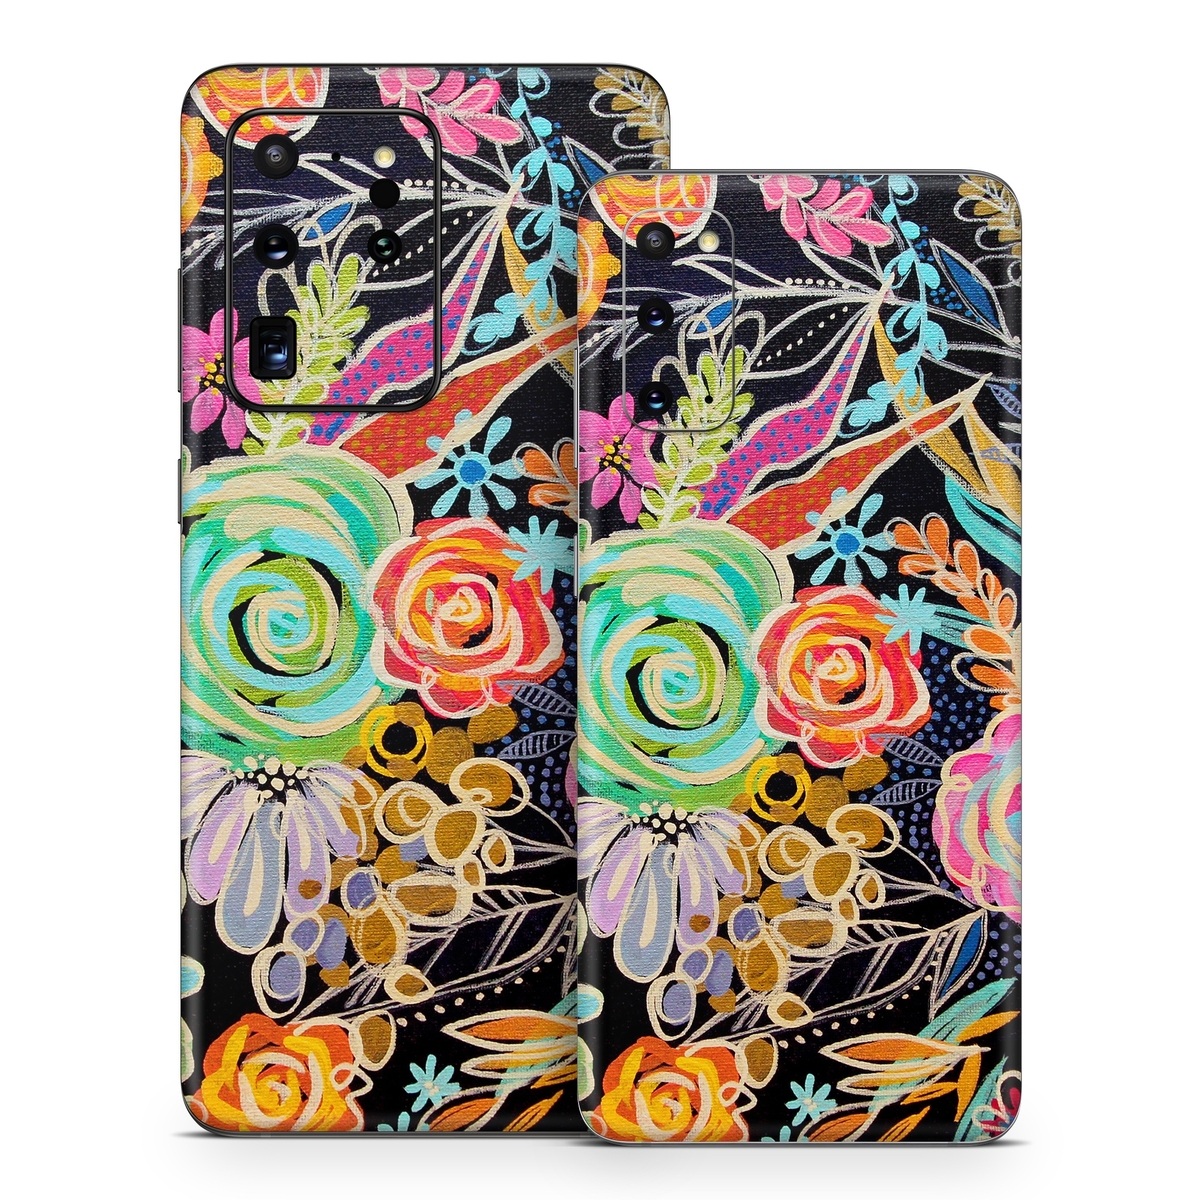 Samsung Galaxy S20 Series Skin design of Pattern, Floral design, Design, Textile, Visual arts, Art, Graphic design, Psychedelic art, Plant, with black, gray, green, red, blue colors